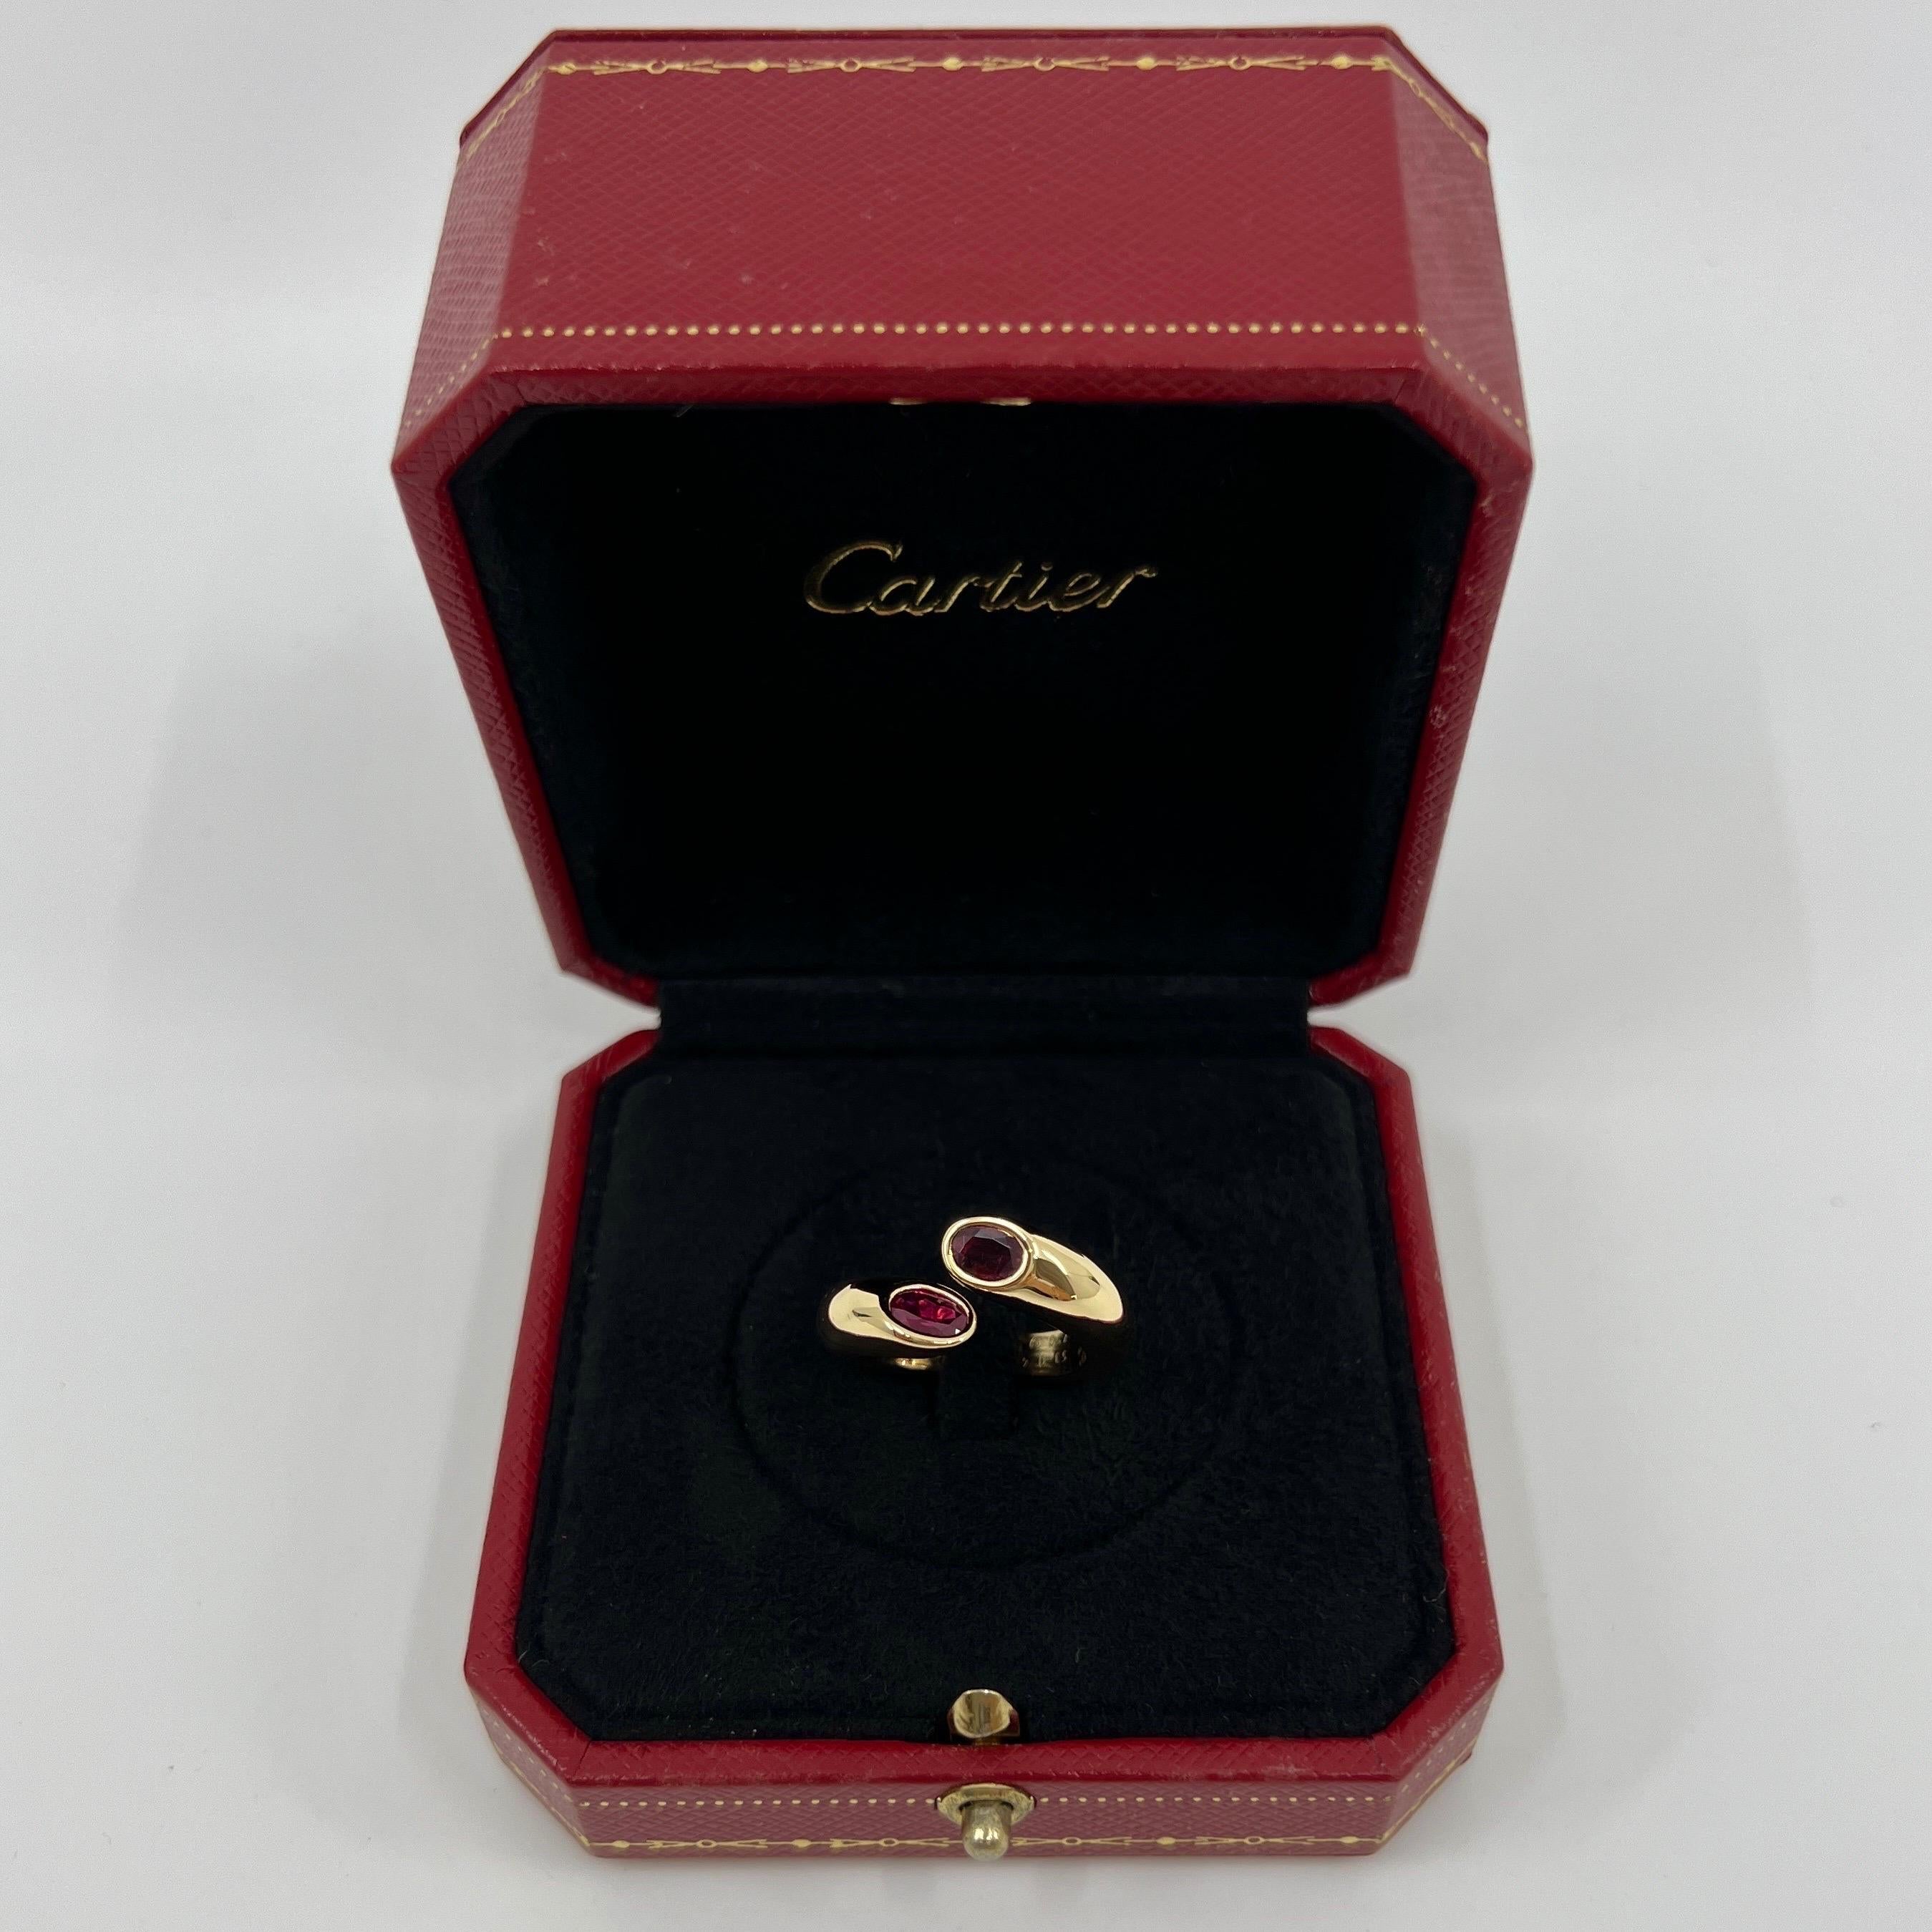 Vintage Cartier Oval Cut Red Ruby 18k Yellow Gold Split Bypass Ring.

Stunning yellow gold ring set with 2 fine bright red oval cut rubies. Fine jewellery houses like Cartier only use the finest of gemstones and these rubies are no exception.

Two